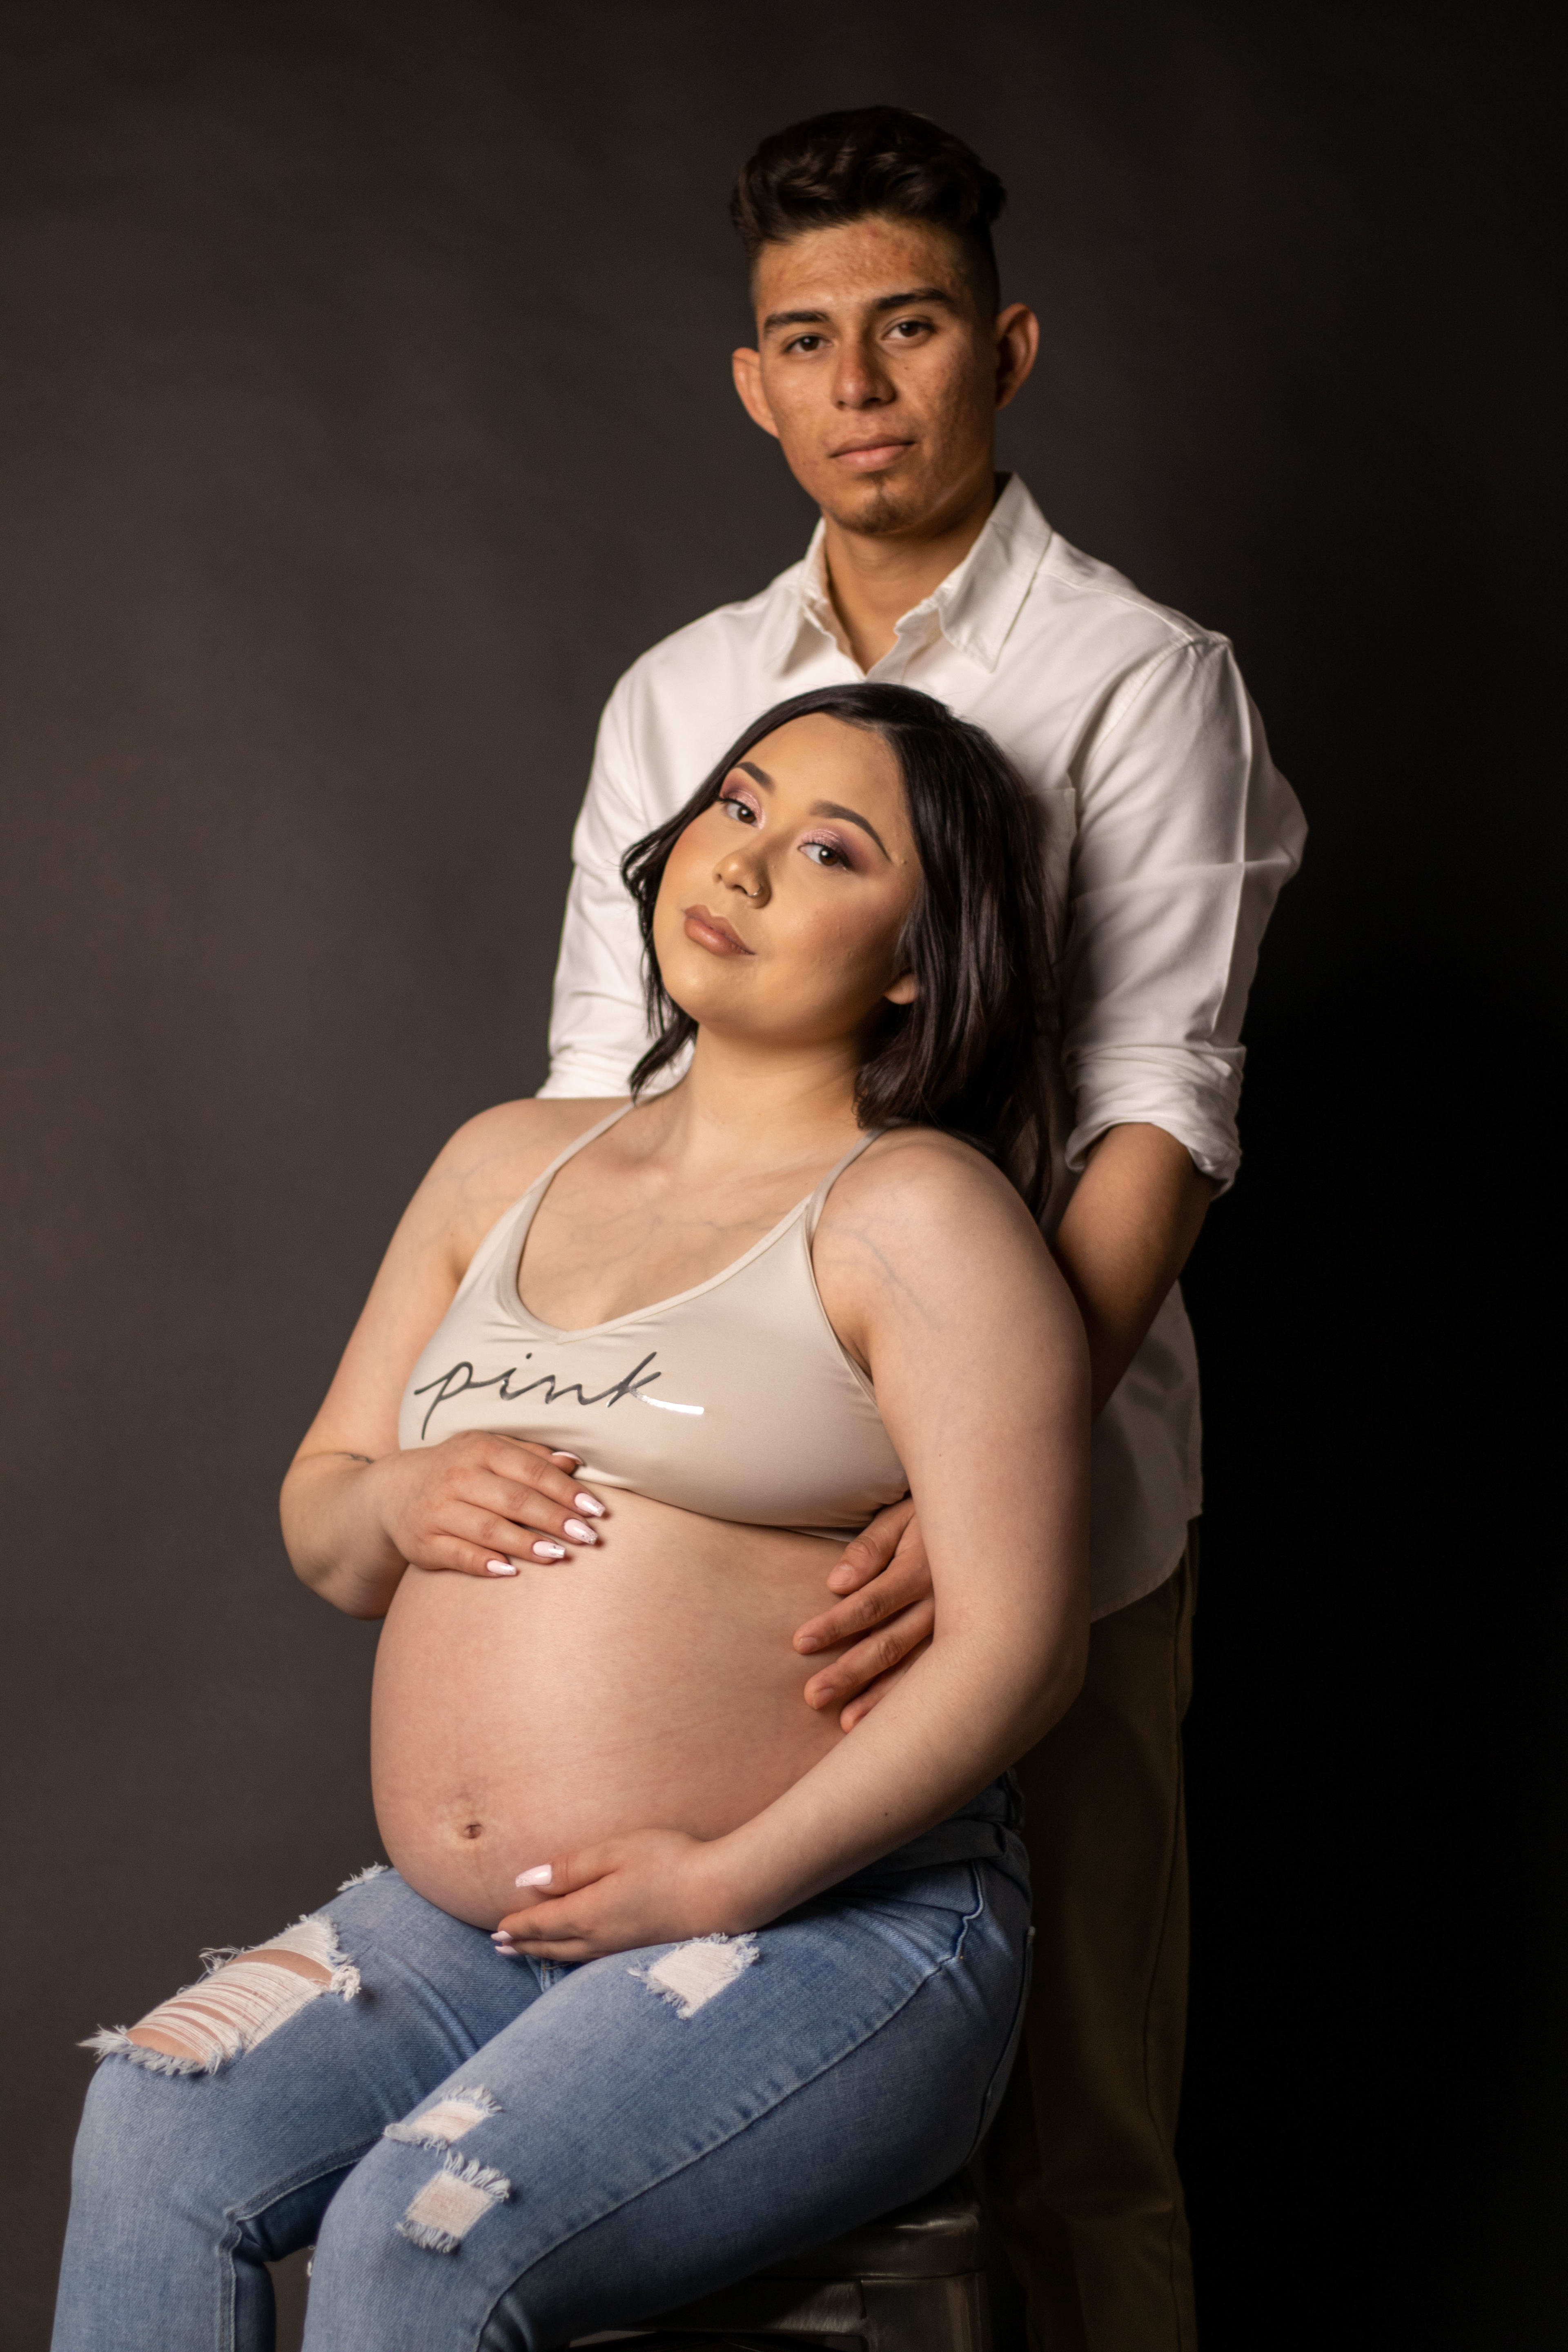 Maternity photoshoot of a pregnant woman on stool with a man holding her from behind.